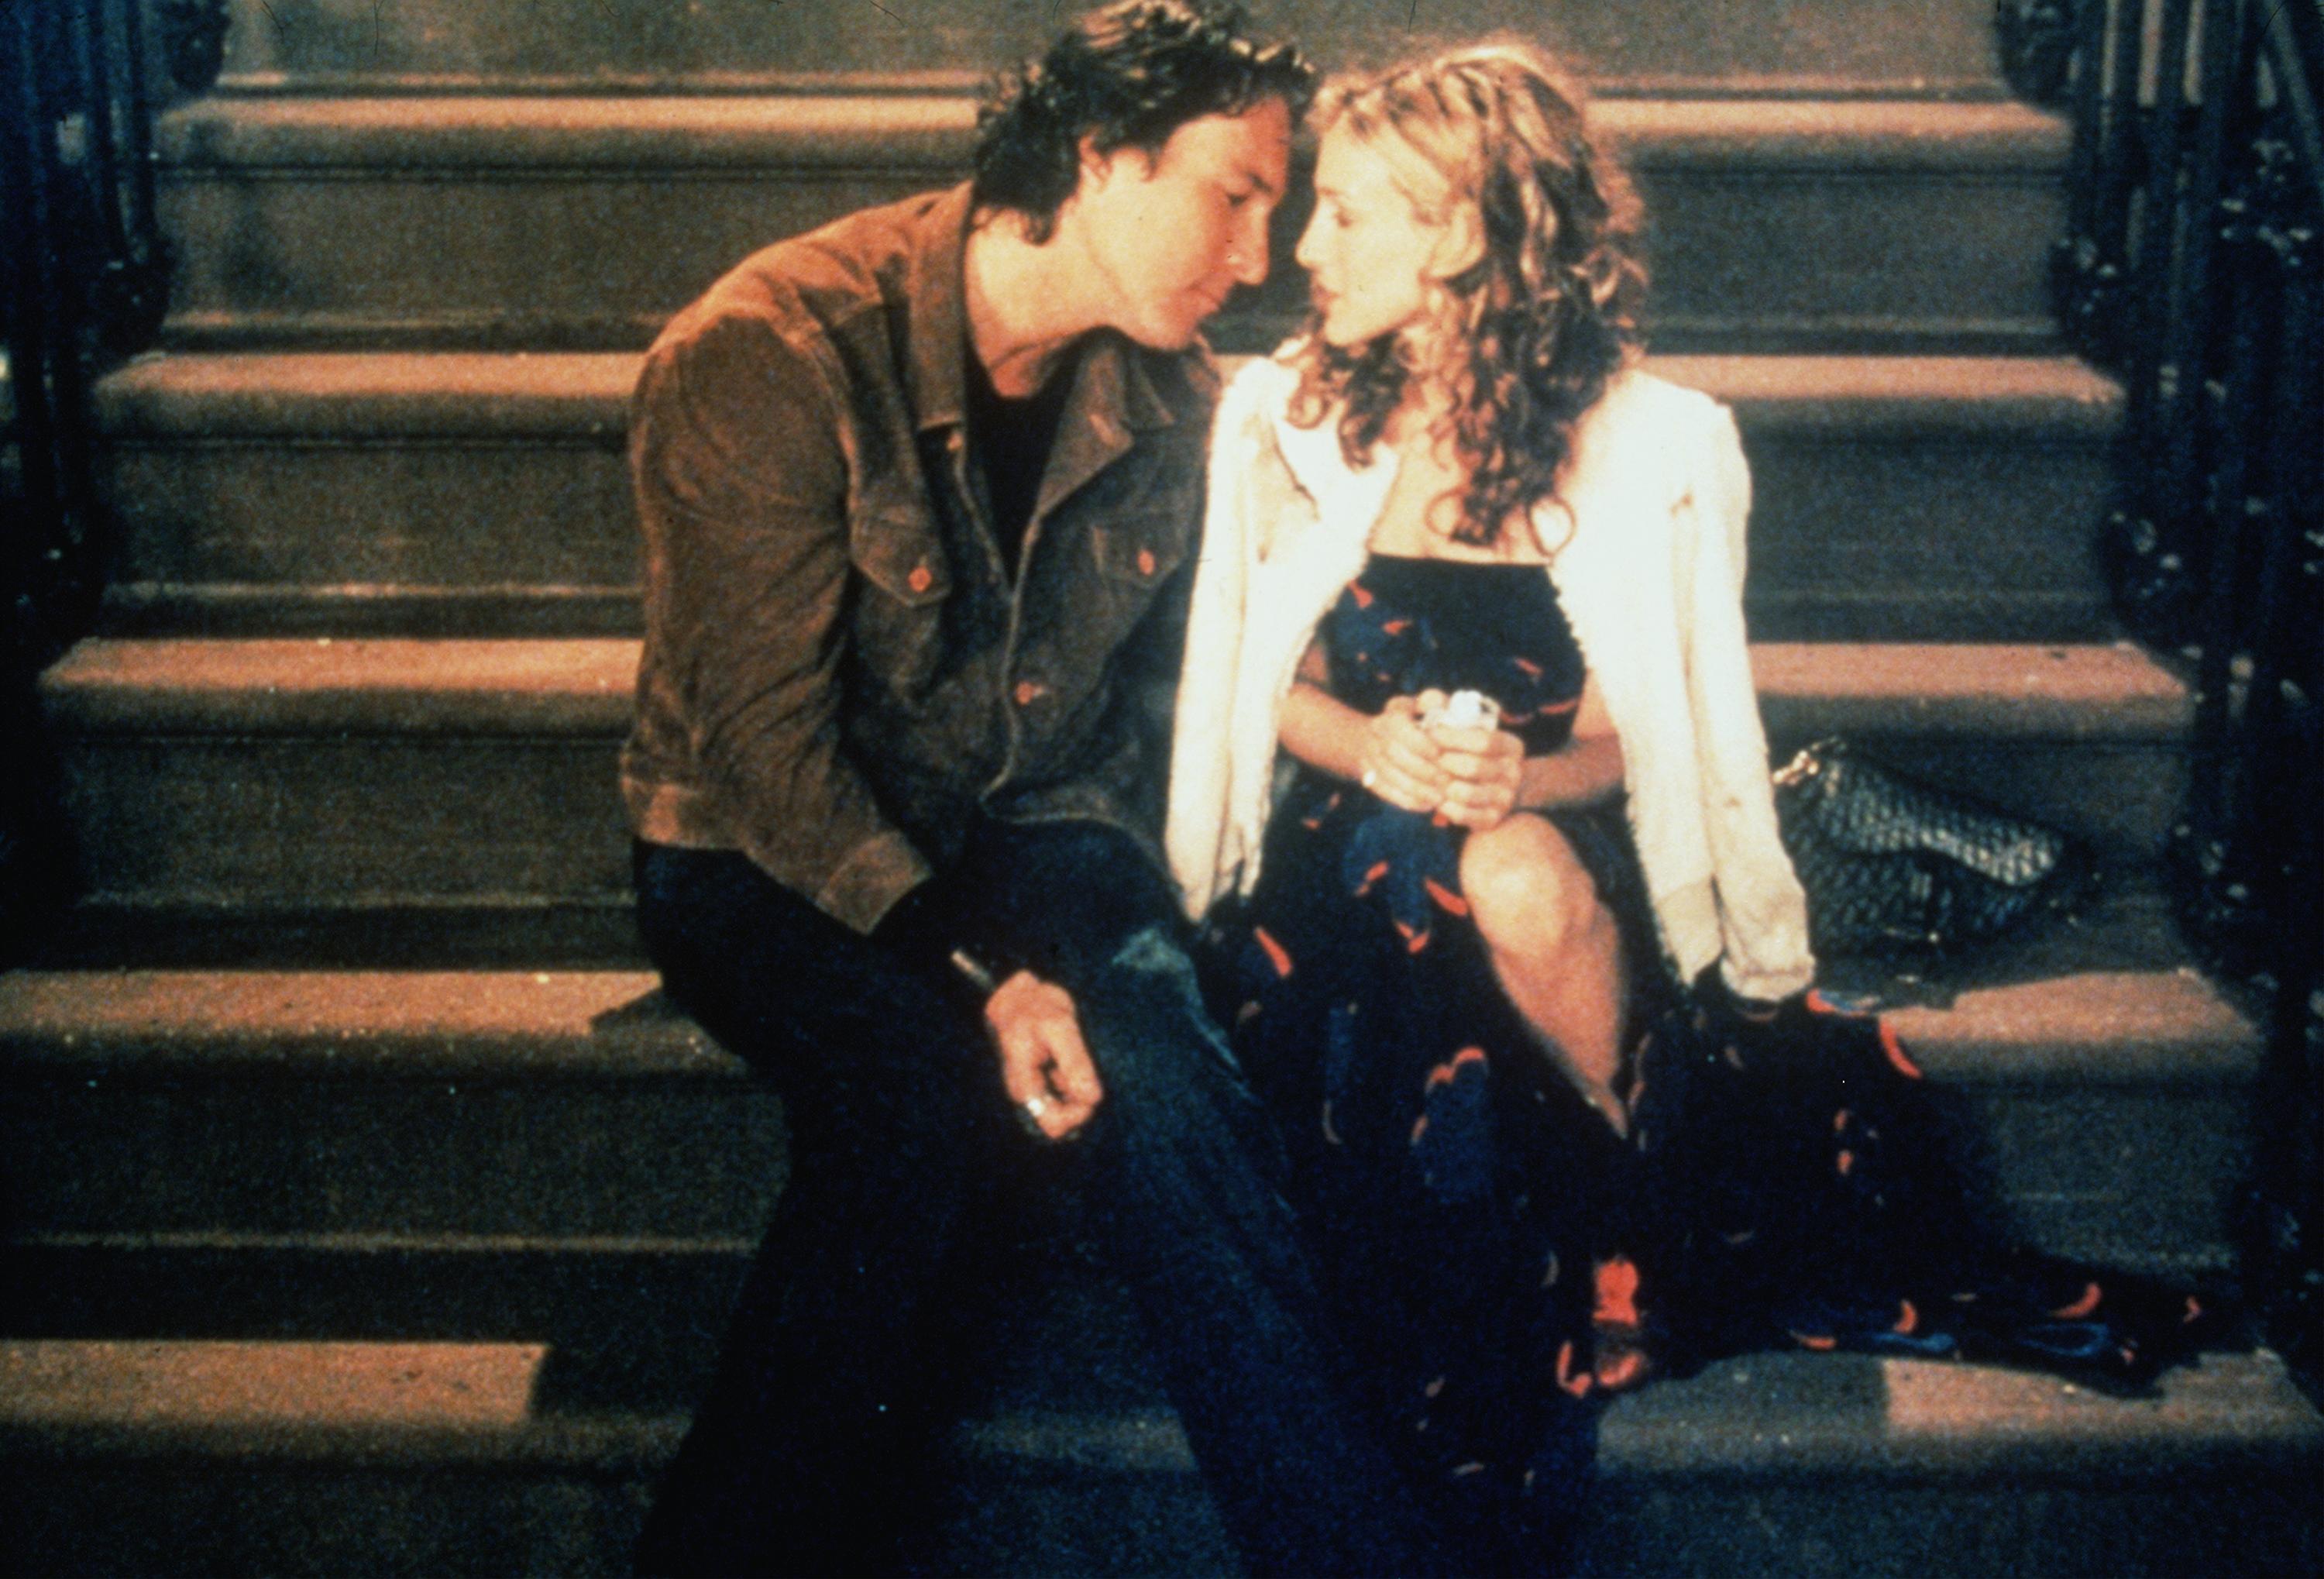 John Corbett as Aidan Shaw leaning in for a kiss while sitting next to Sarah Jessica Parker as Carrie Bradshaw on 'Sex and the City'